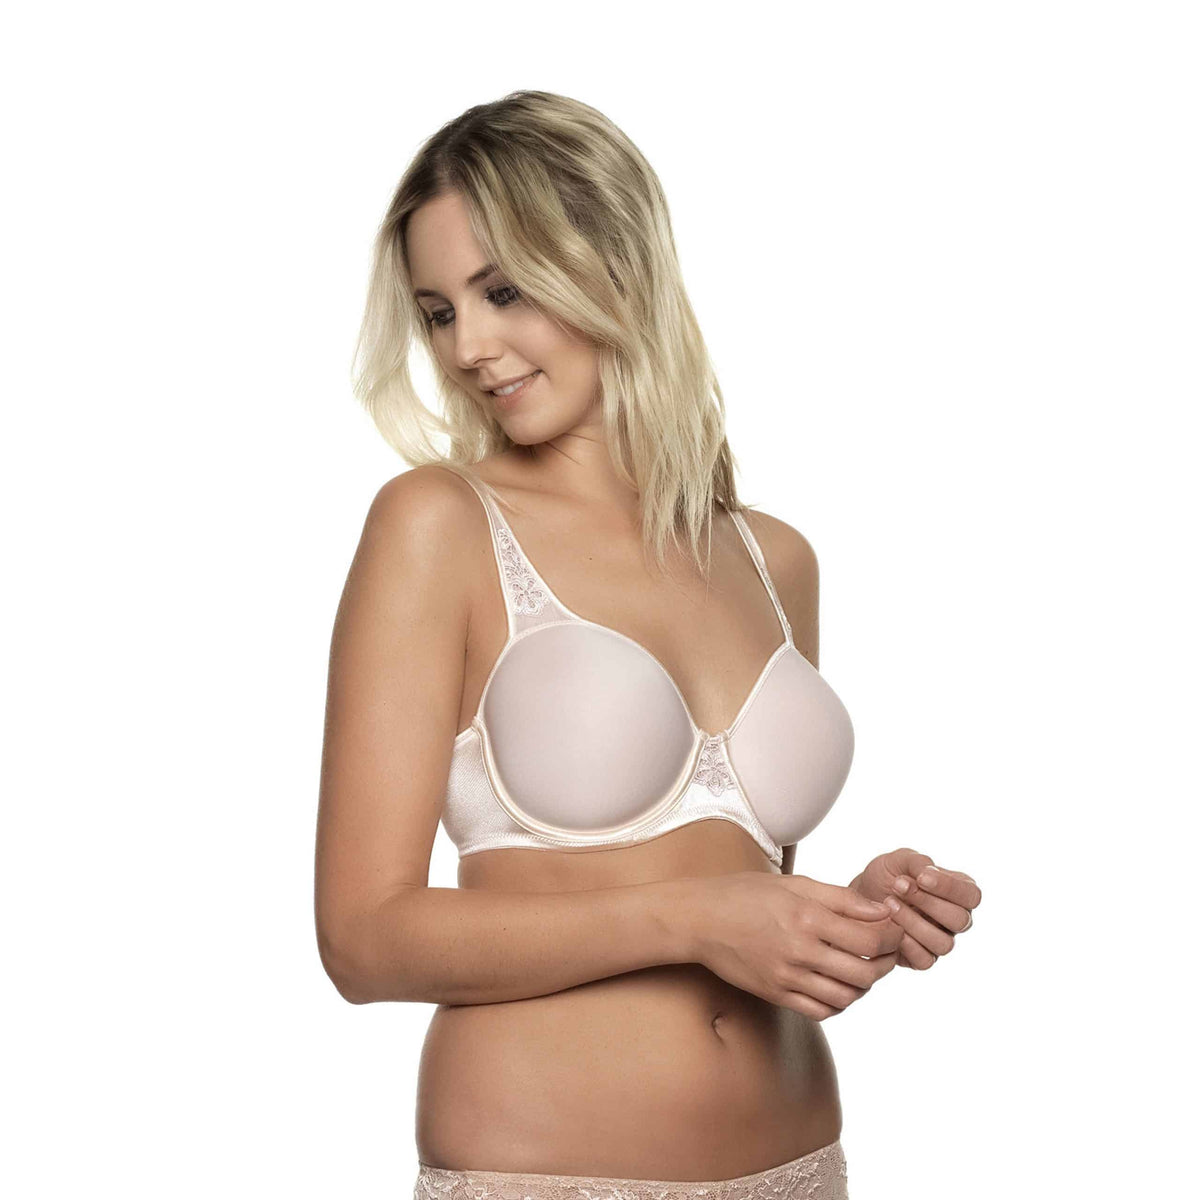 Elbrina Underwired Bra. Very supportive up to G Cup